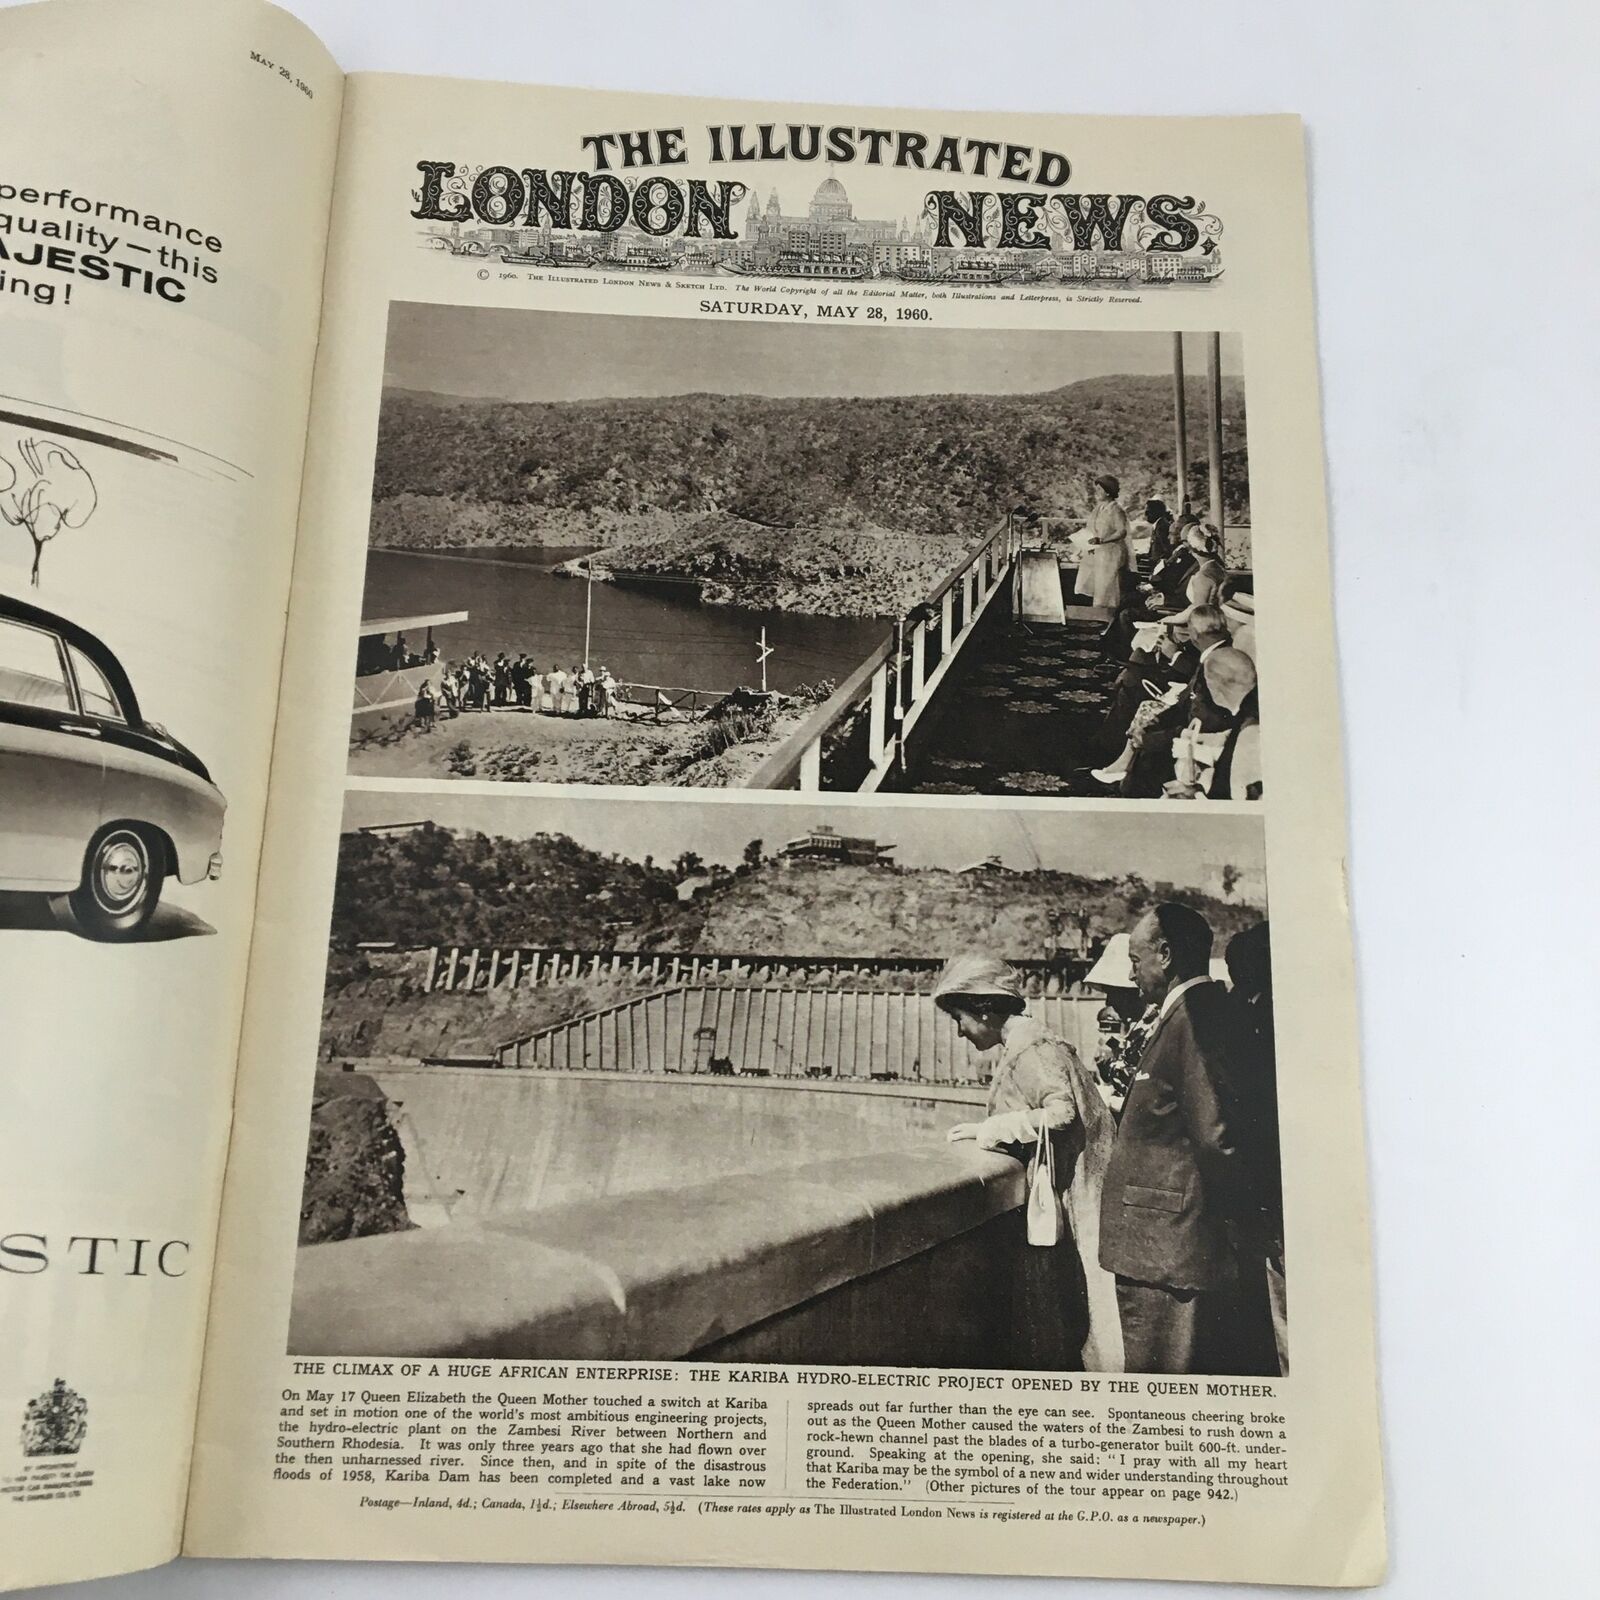 The Illustrated London News May 28 1960 The Kariba Hydro-Electric Project